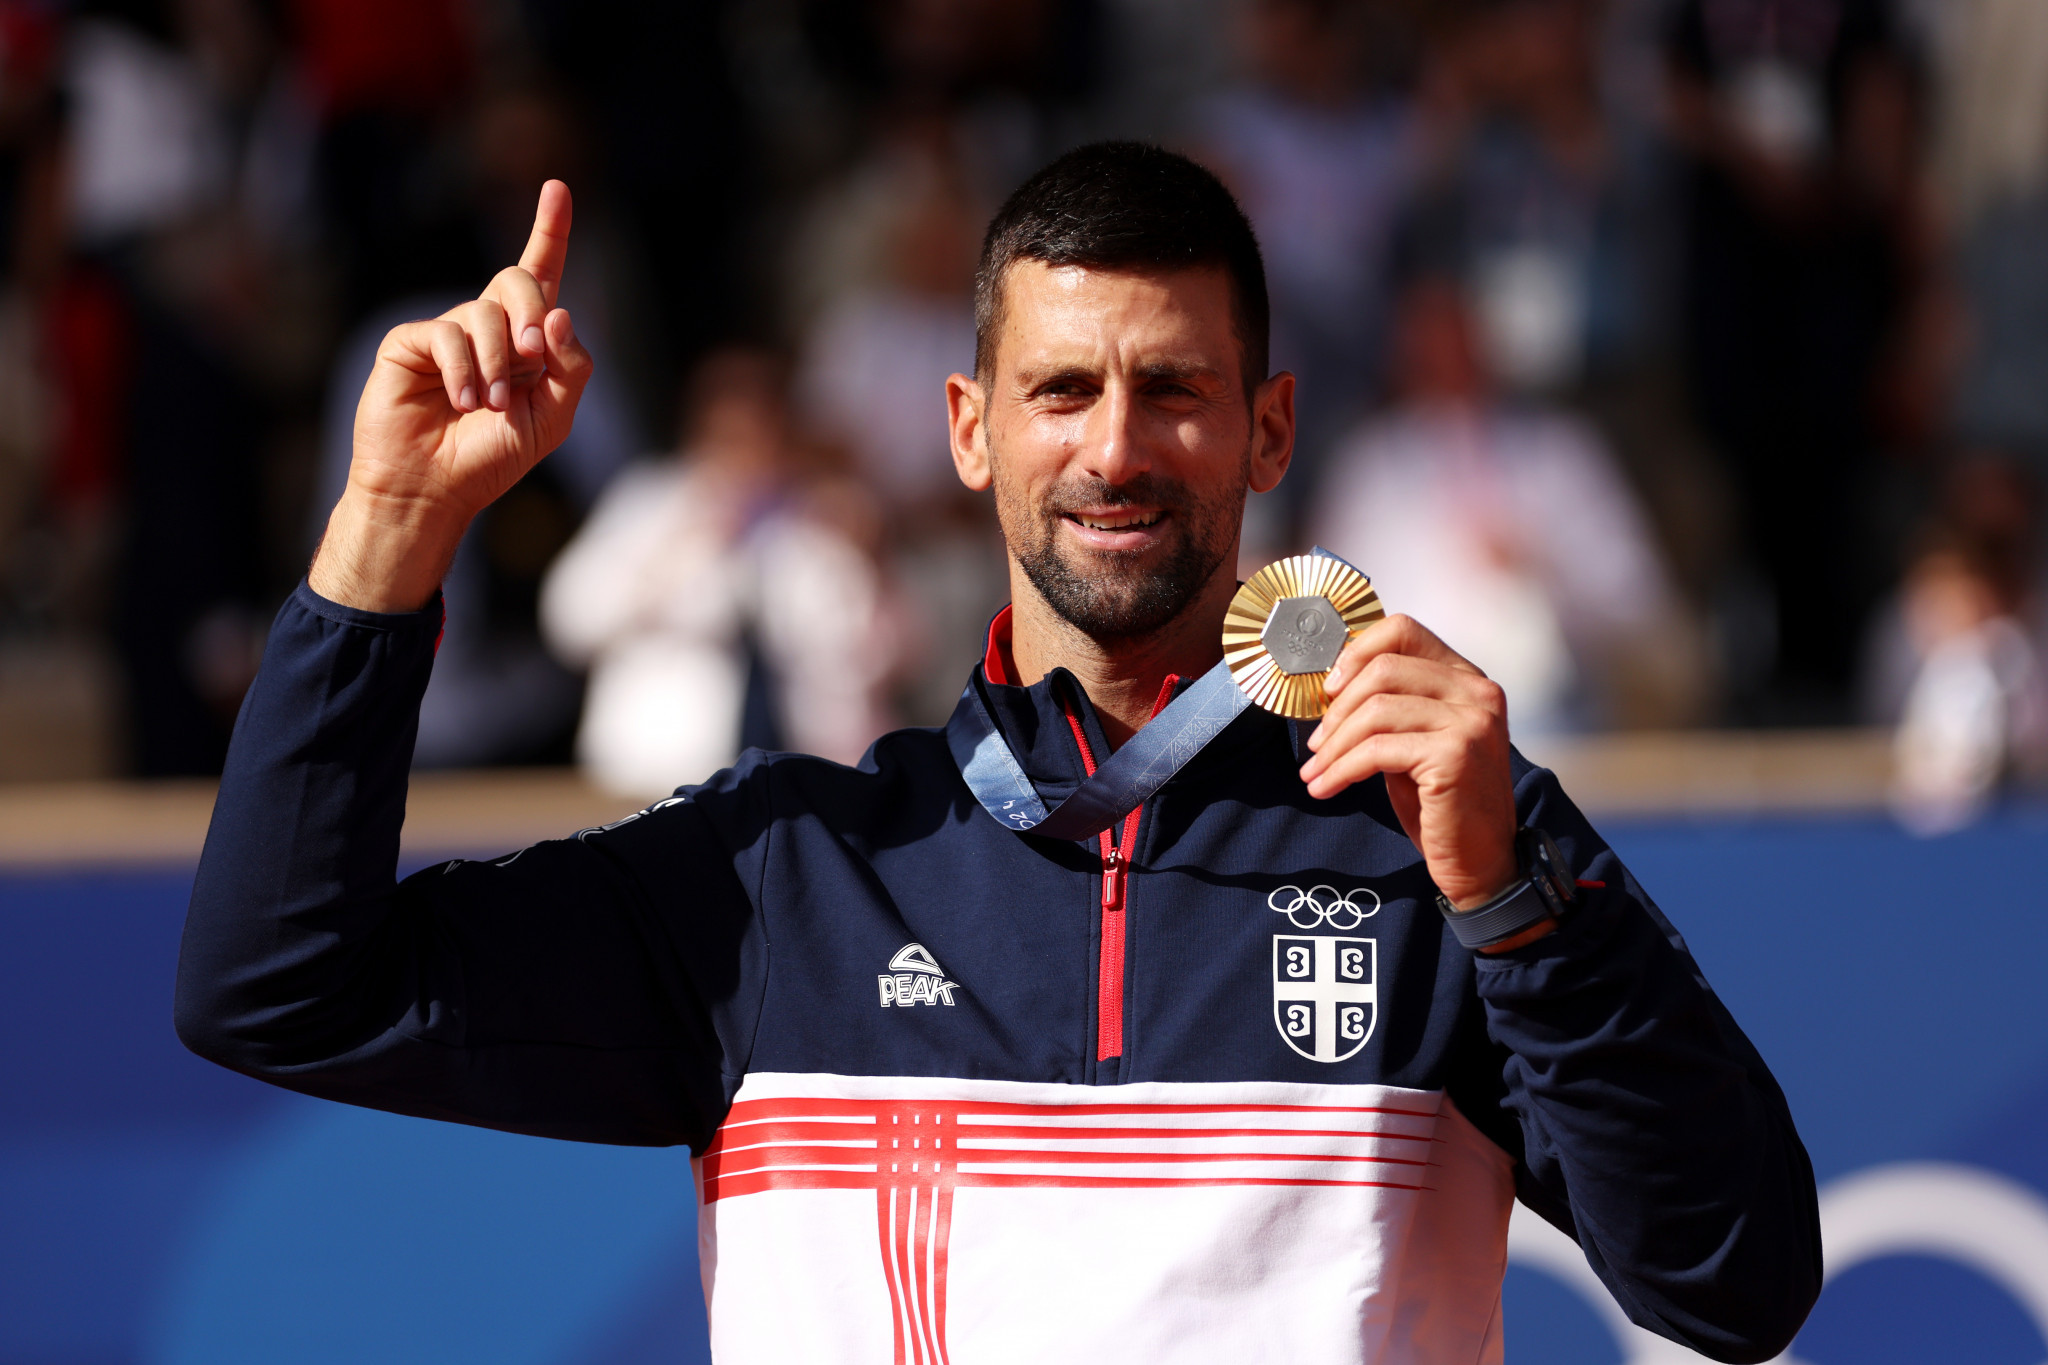 Novak Djokovic got his hands on Olympic gold. GETTY IMAGES